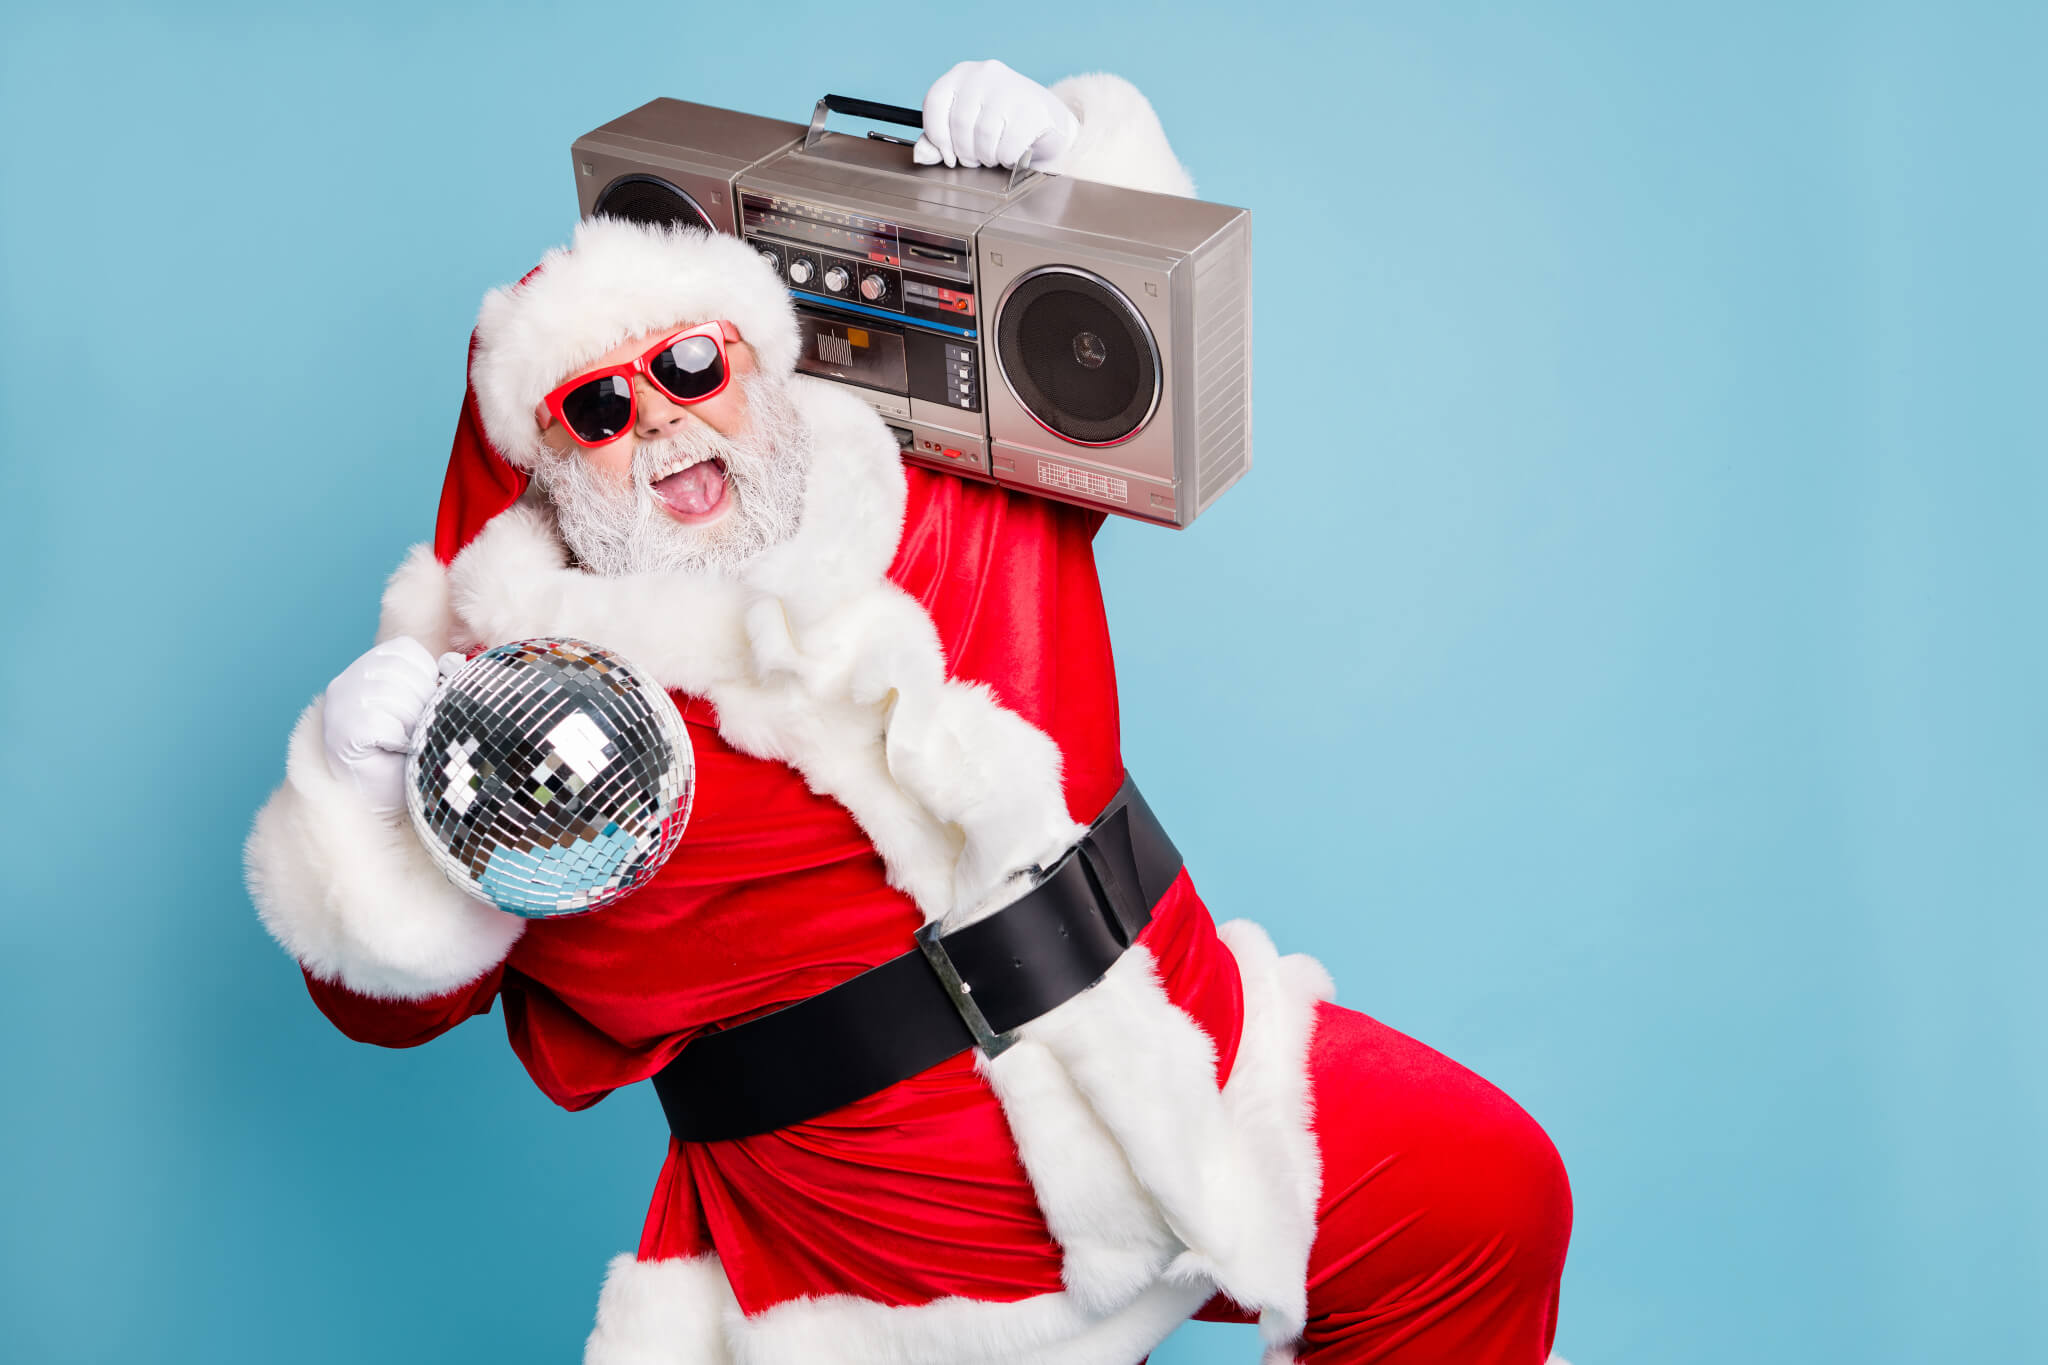 Santa carrying a tape player and dancing